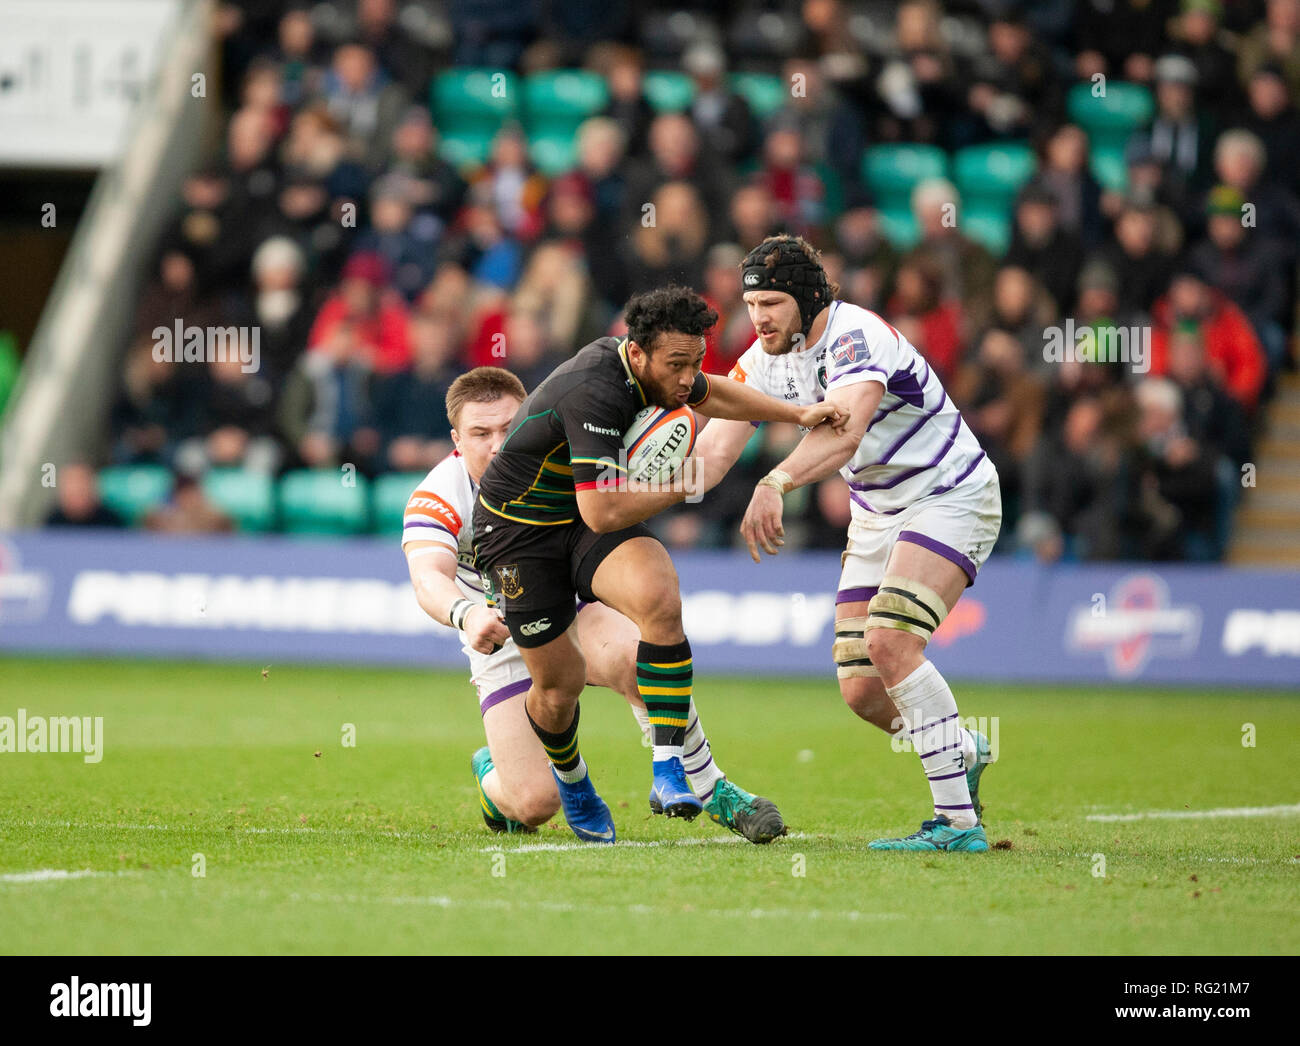 Northampton, UK. 26th January 2019. Nafi Tuitavake of Northampton Saints runs with the ball during the Premiership Rugby Cup match between Northampton Saints and Leicester Tigers. Andrew Taylor/Alamy Live News Stock Photo